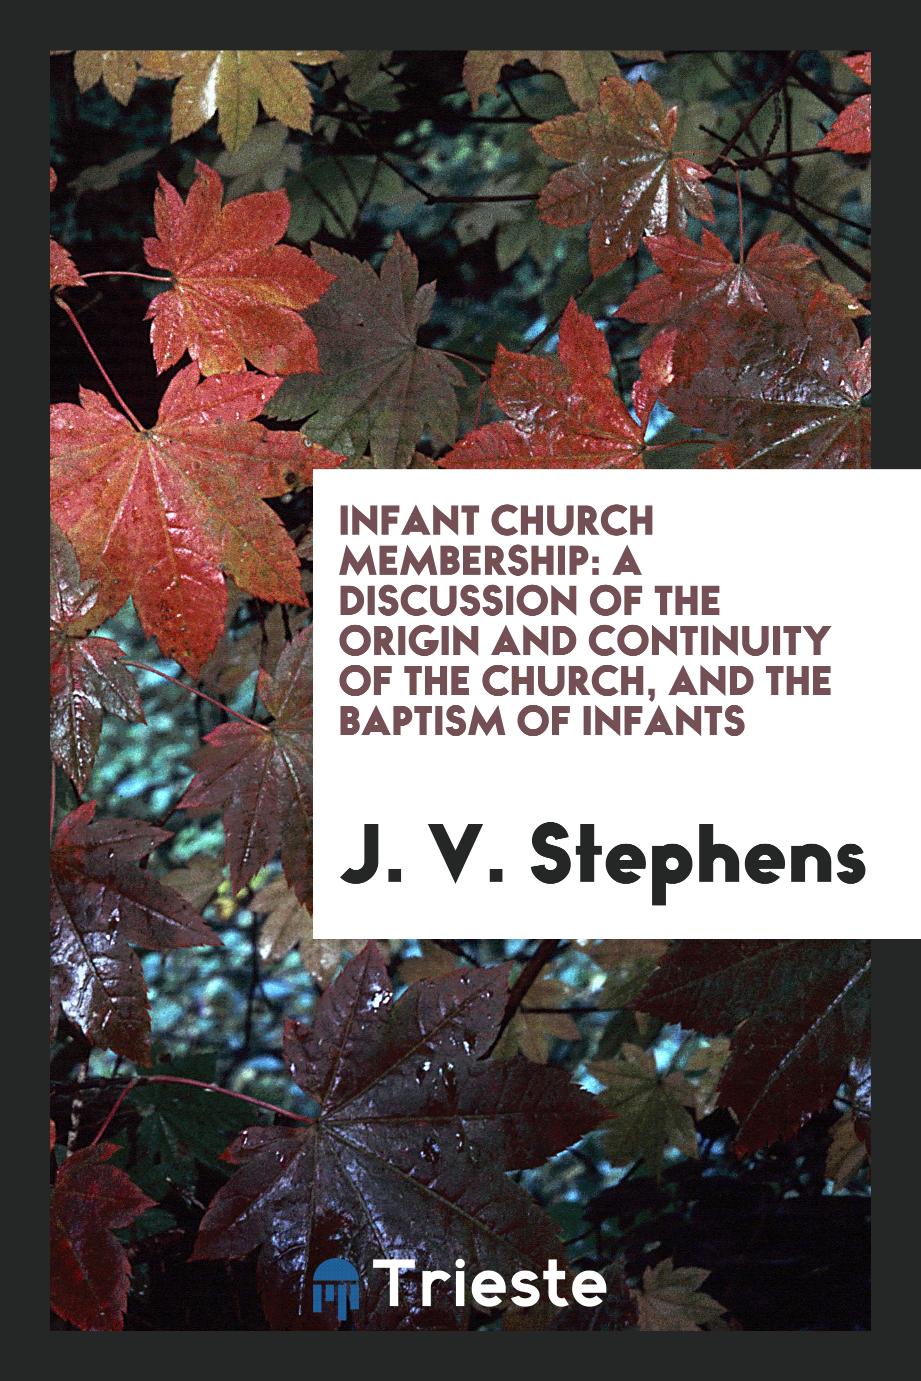 Infant Church Membership: A Discussion of the Origin and Continuity of the Church, and the baptism of infants